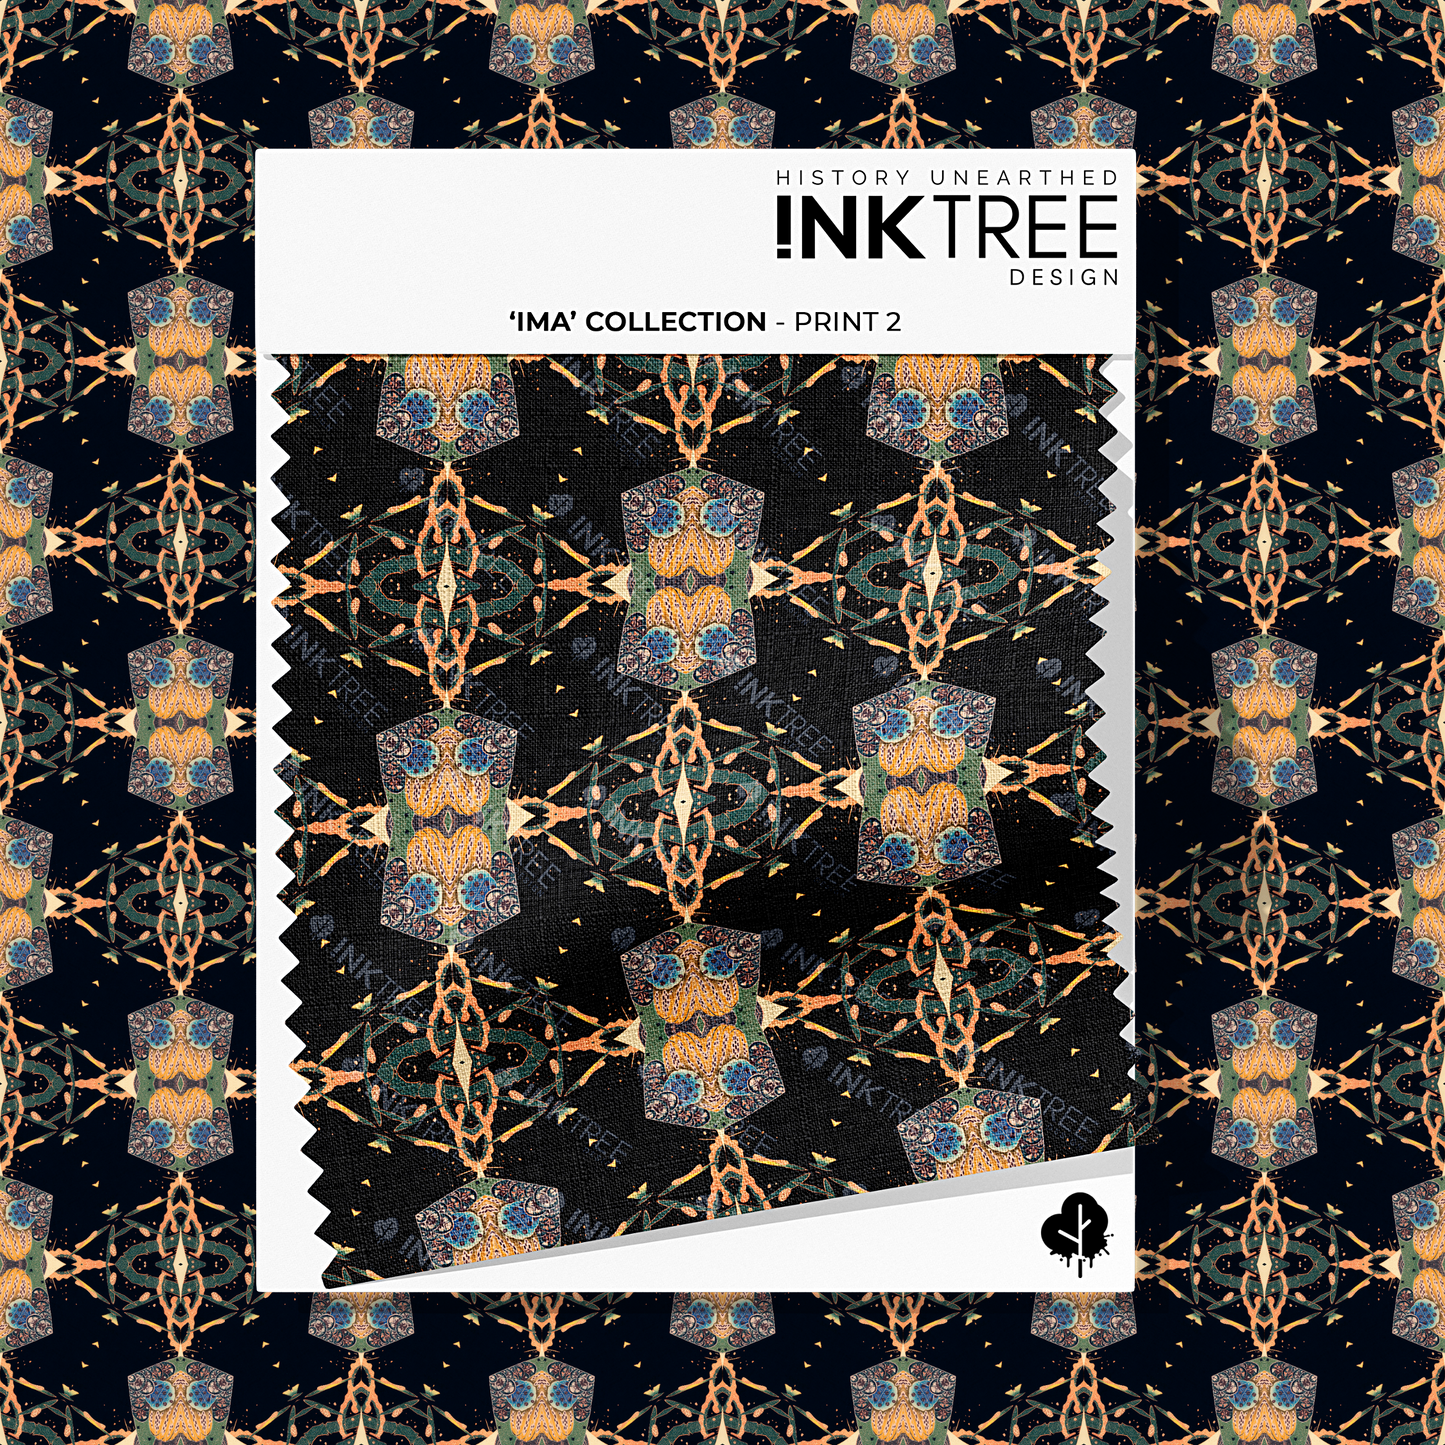 A white card fabric swatch with a gold, black, blue, green and white oriental looking pattern and ink tree design logo on it.  There is the same pattern on the background.